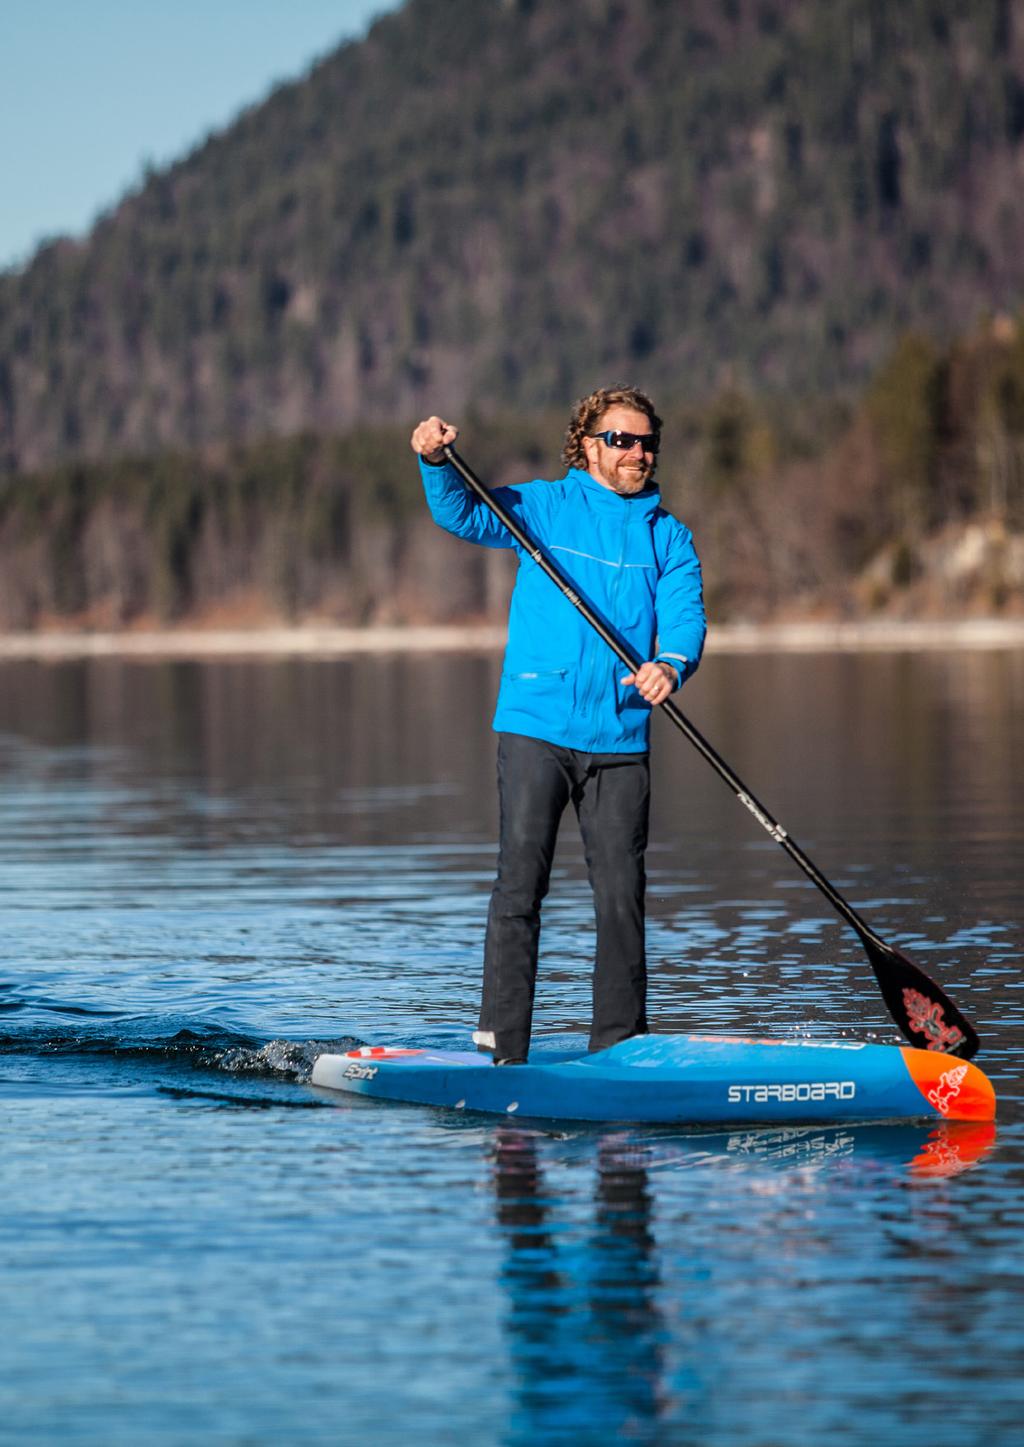 THE EASY RIDER MEN S ELEMENT SUP SUIT The Element Dry Suit is 100% waterproof and unlike the SUP suit, is 100% sealed.